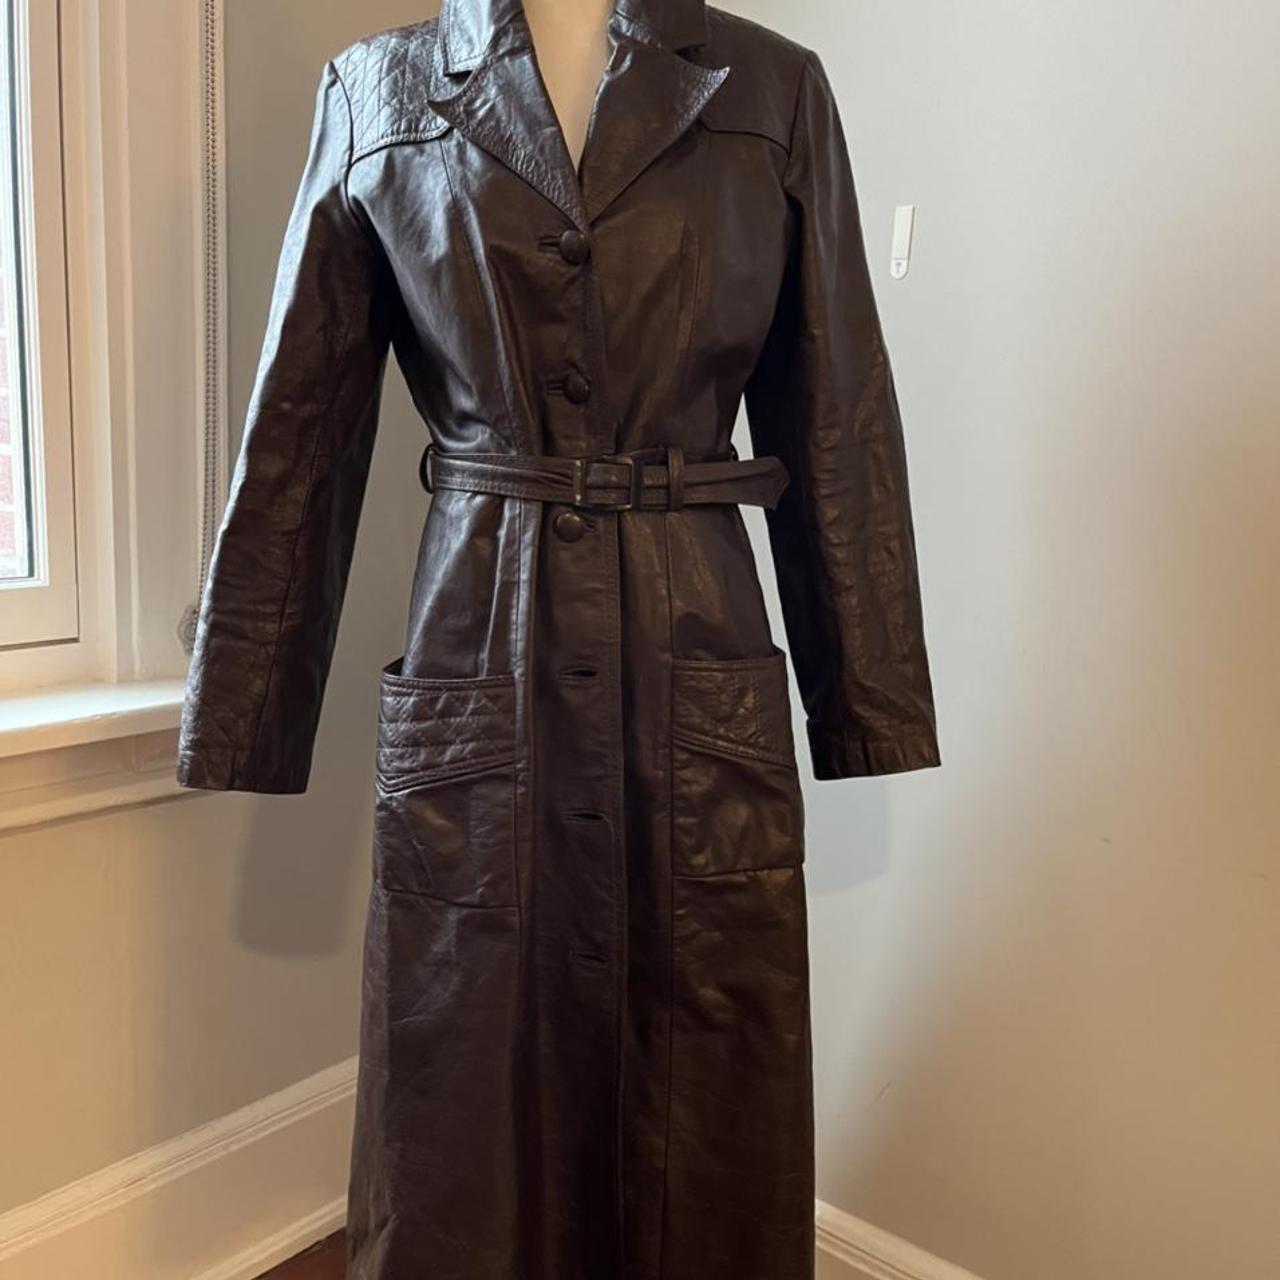 Vintage 70s belted leather trench coat. Chocolate... - Depop